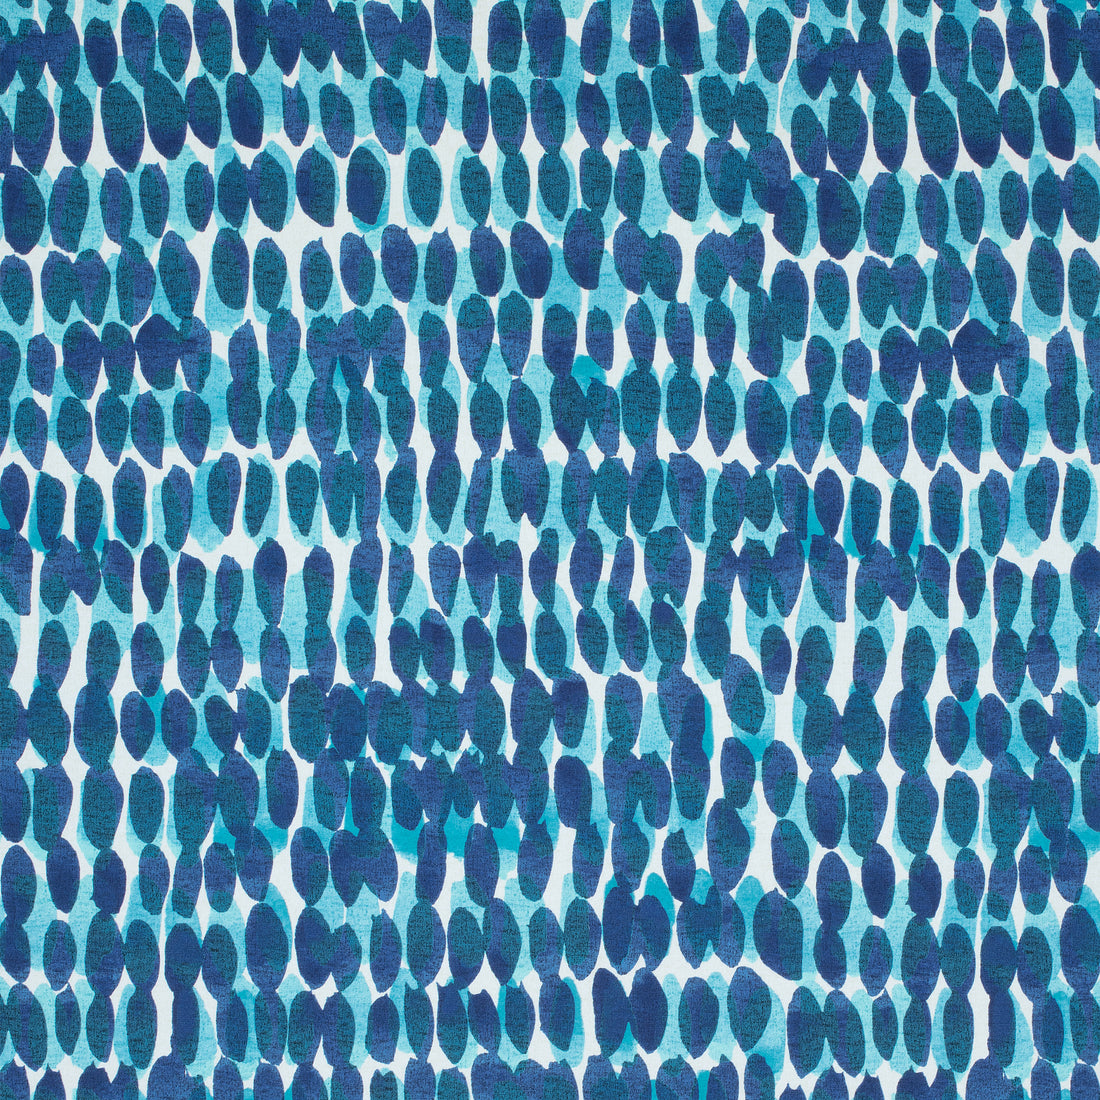 Rain Water fabric in blue and turquoise color - pattern number F910093 - by Thibaut in the Tropics collection